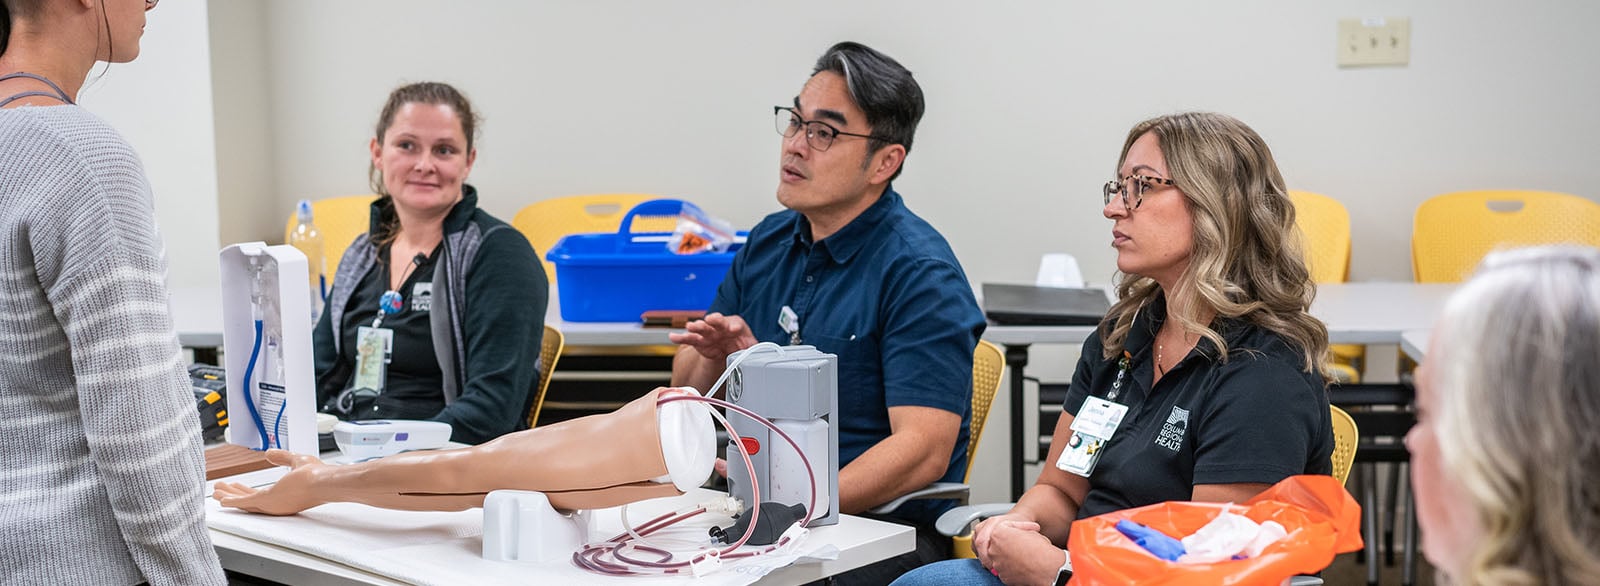 Discover CRH: Connect Your Skills to Healthcare immersive open house.